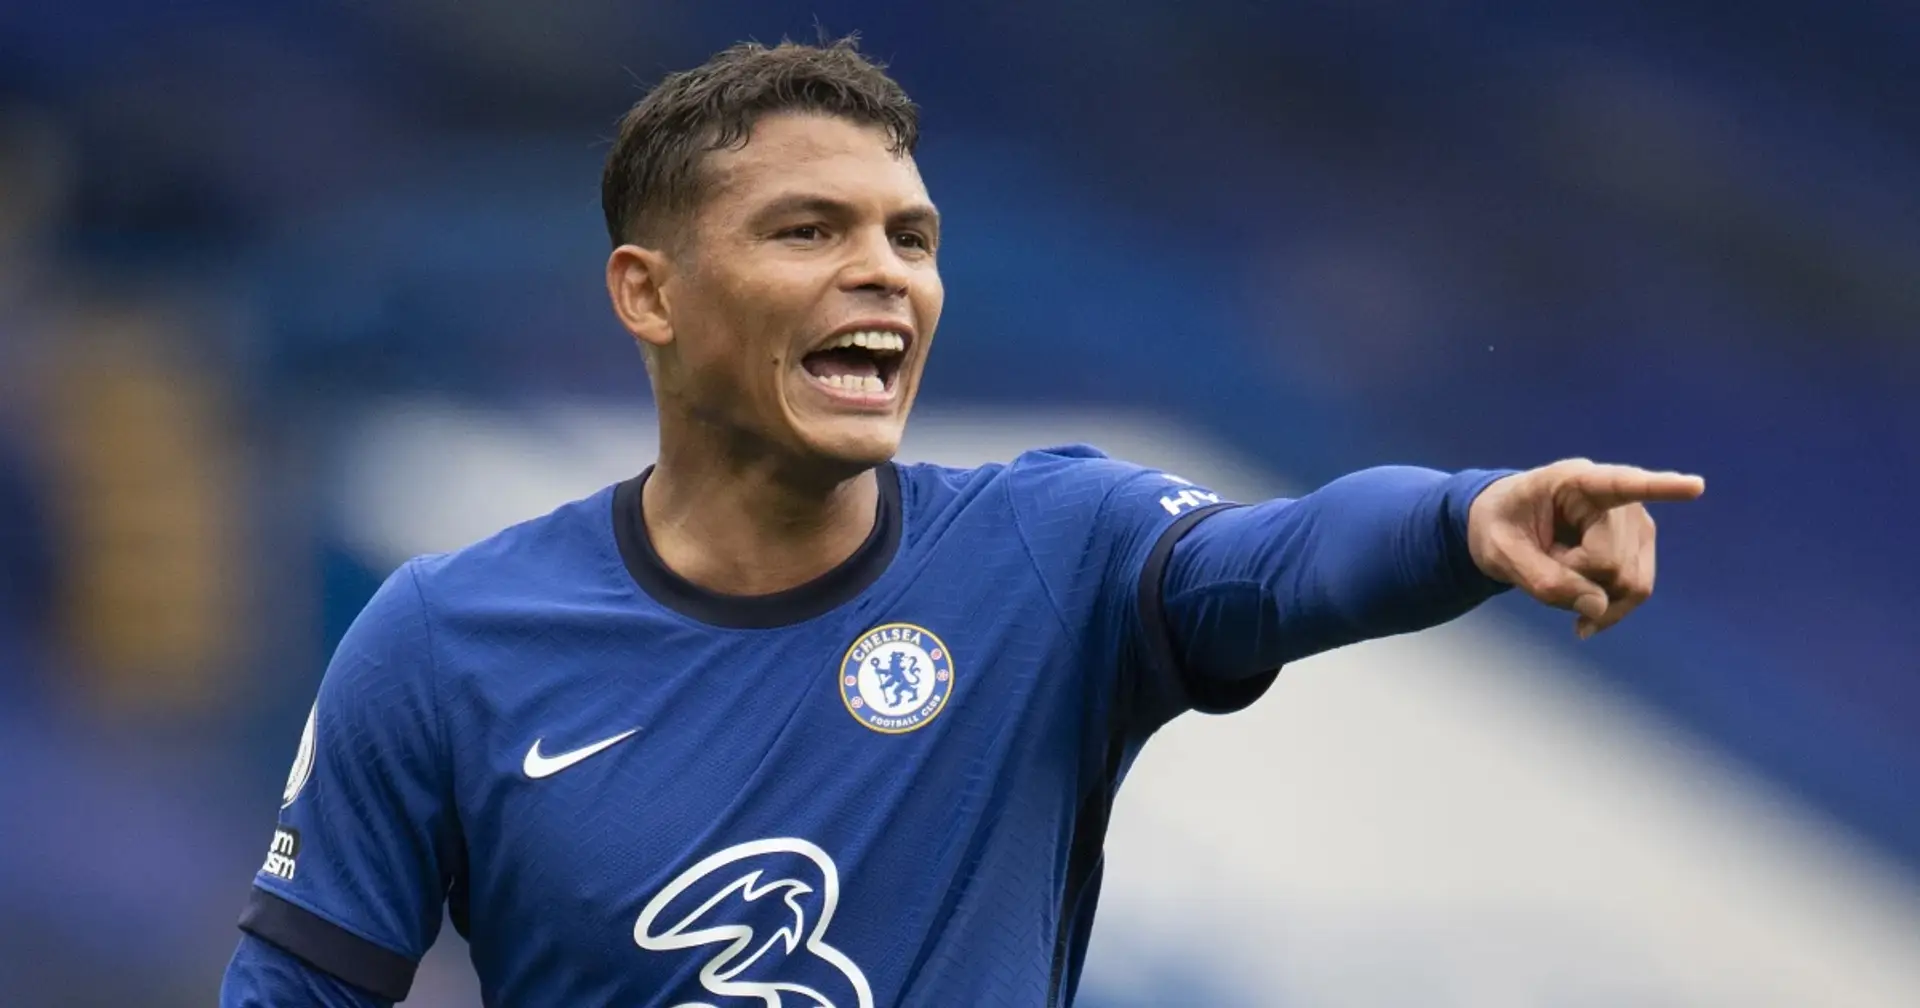 Chelsea to extend Thiago Silva's contract and 4 more big stories you might've missed